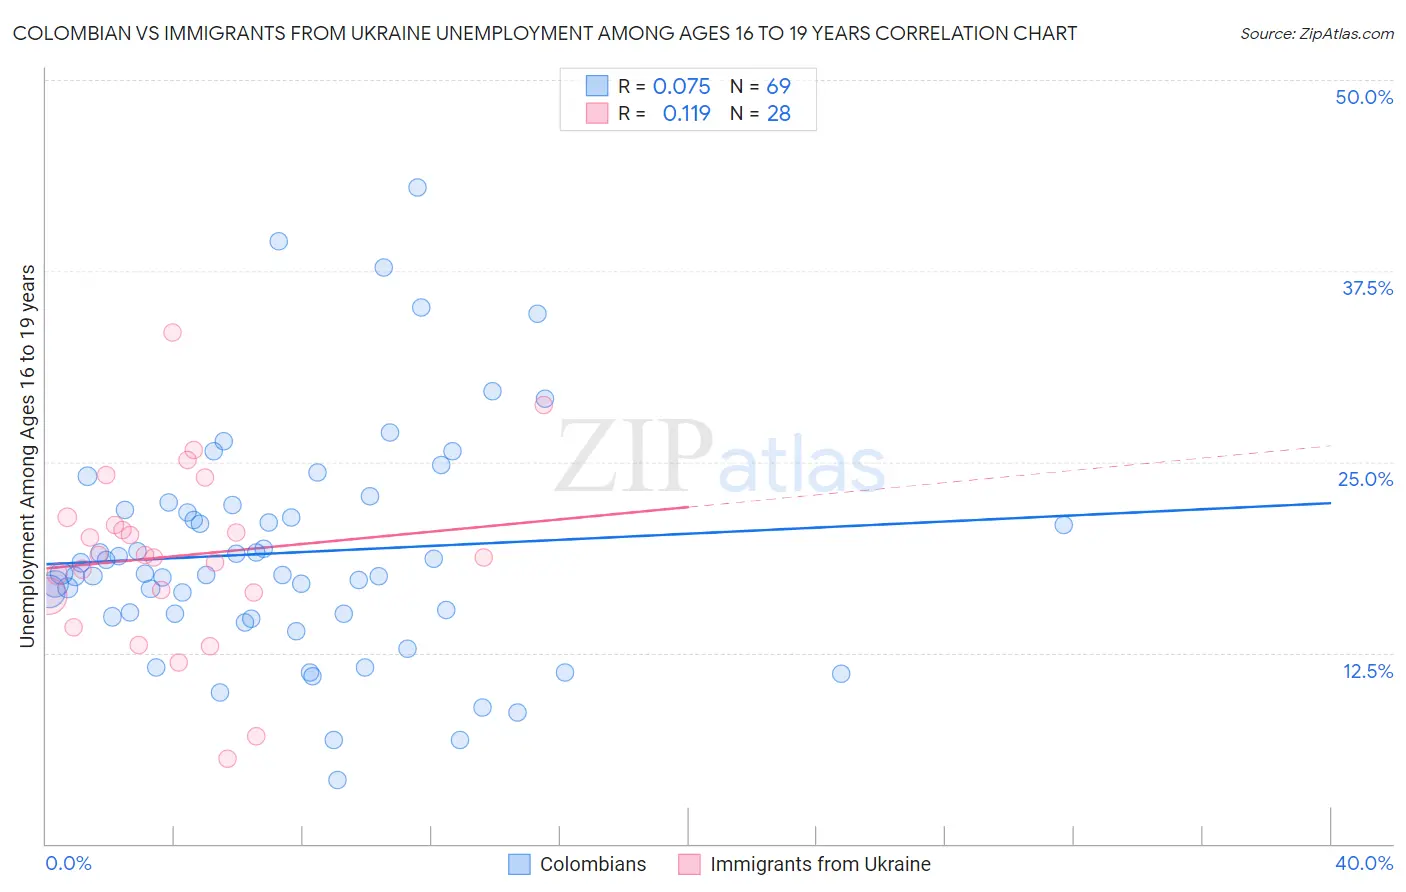 Colombian vs Immigrants from Ukraine Unemployment Among Ages 16 to 19 years